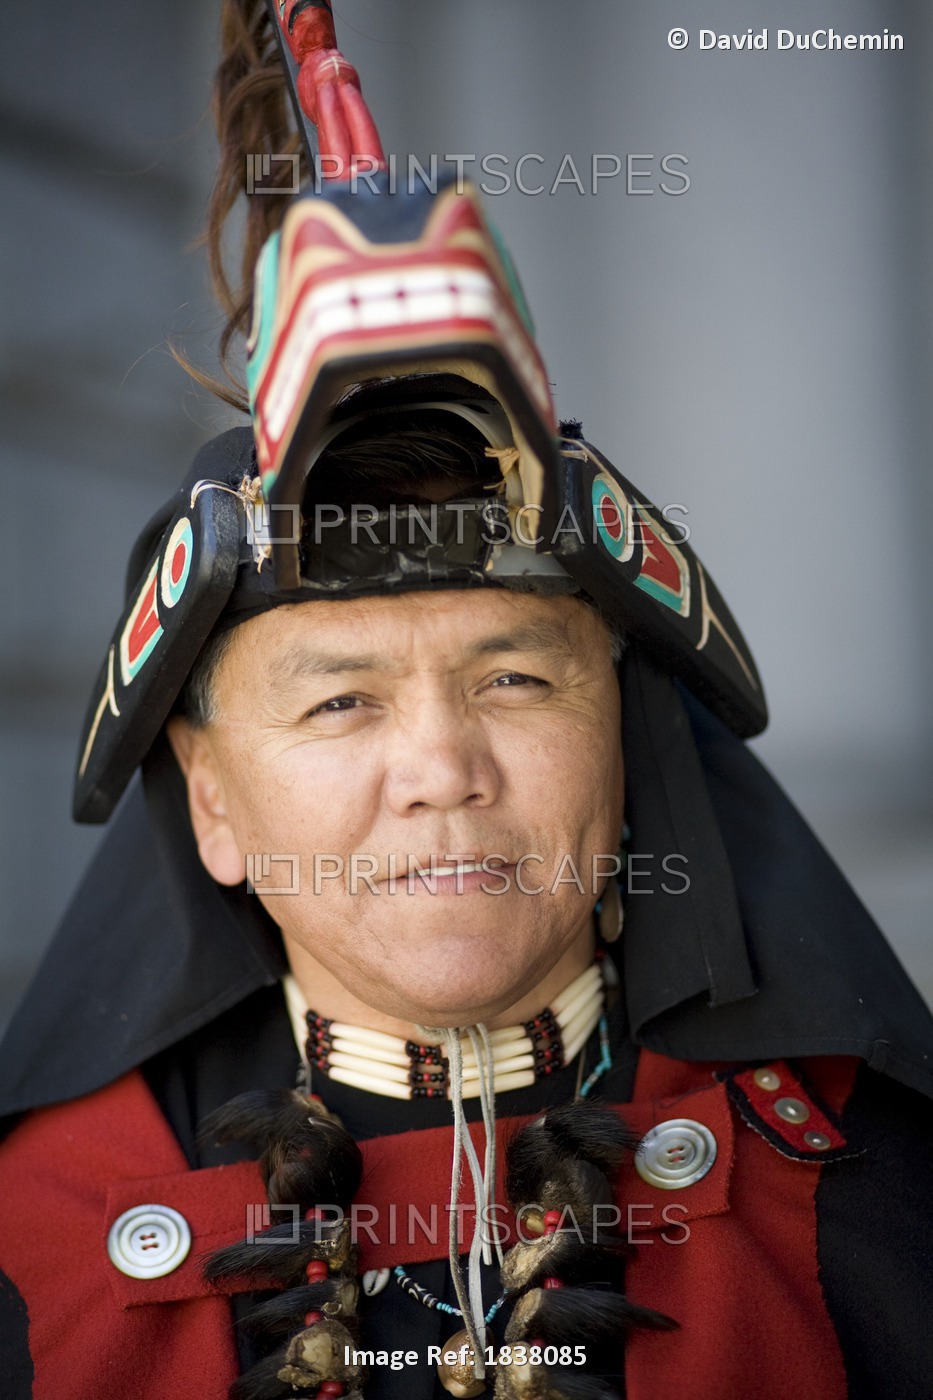 Man Wearing Native American Costume; Vancouver, Canada